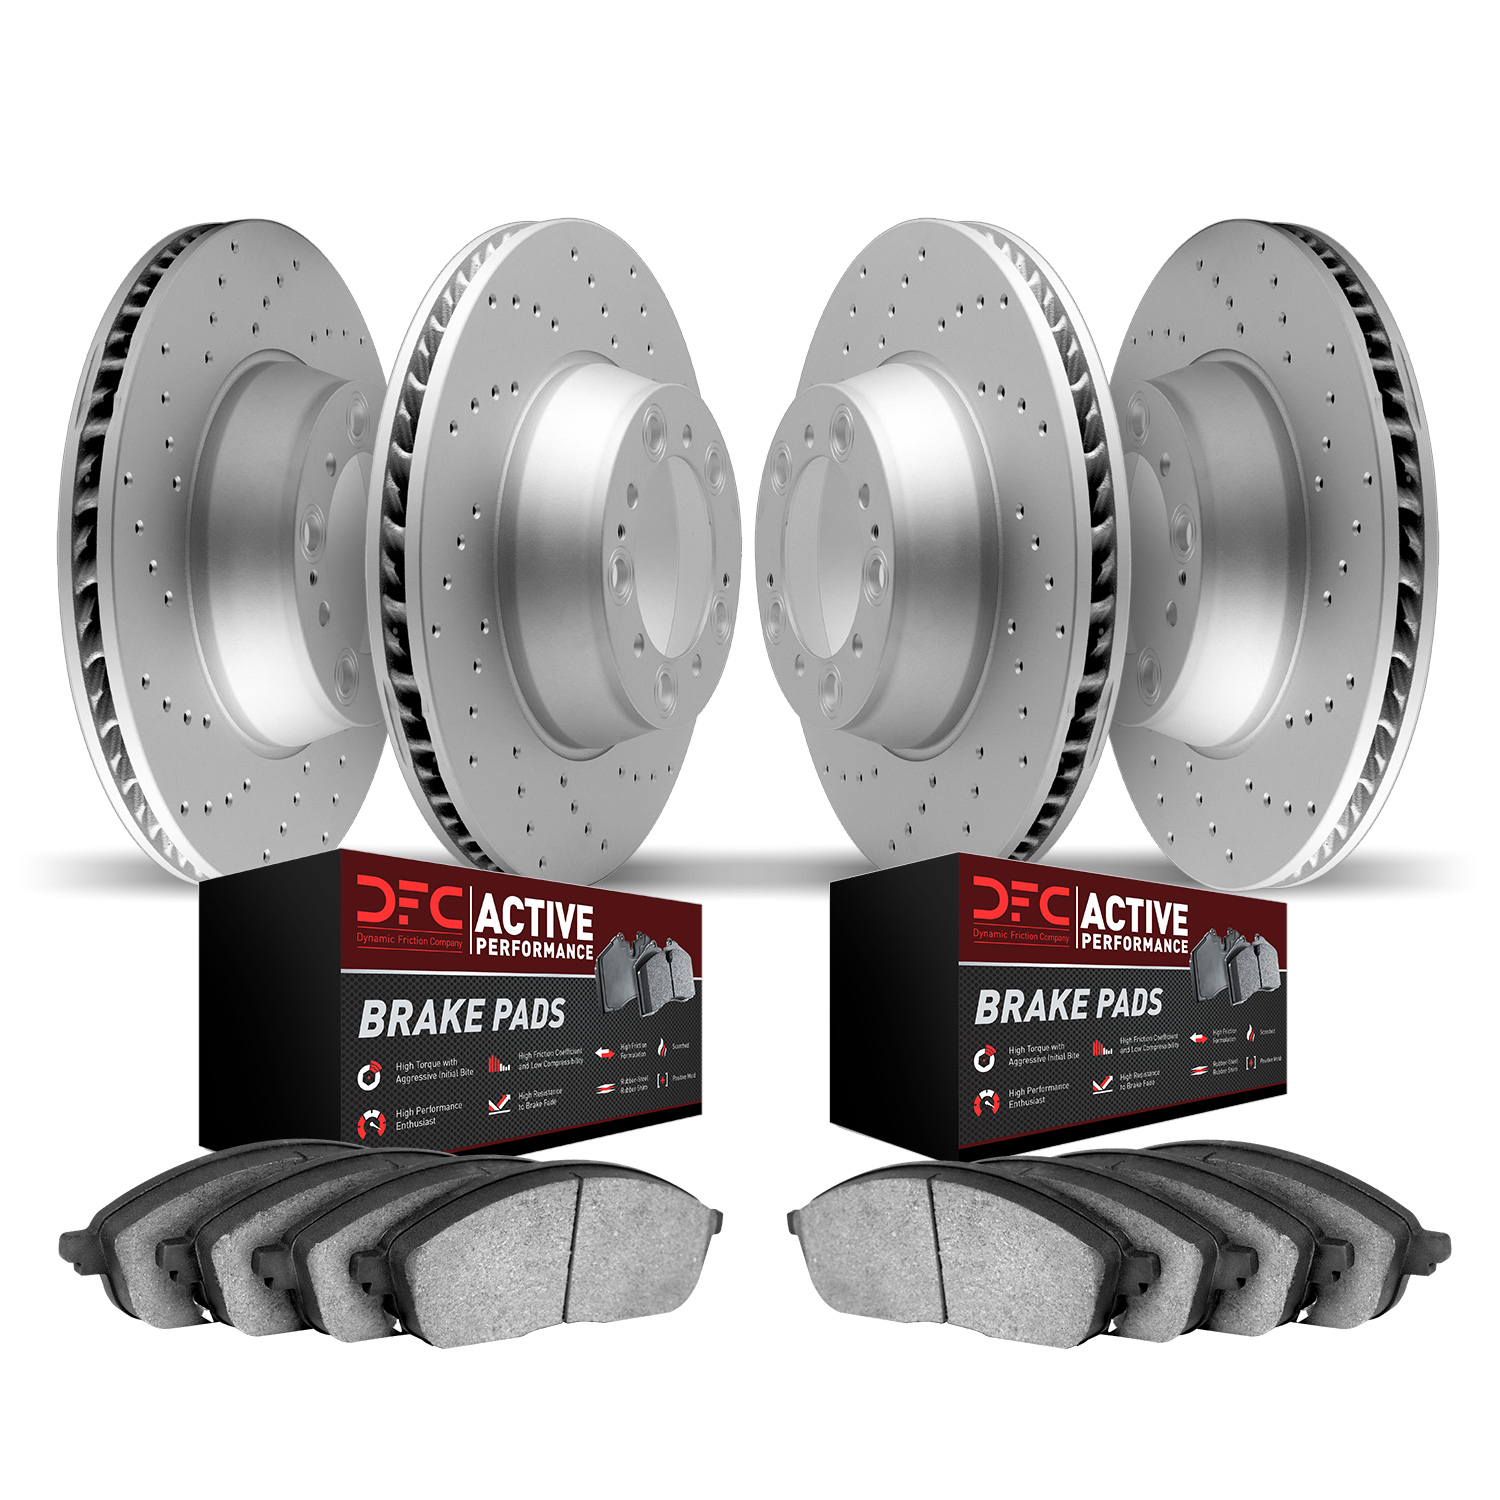 2704-31103 Geoperformance Drilled Brake Rotors with Active Performance Pads Kit, 2009-2016 BMW, Position: Front and Rear